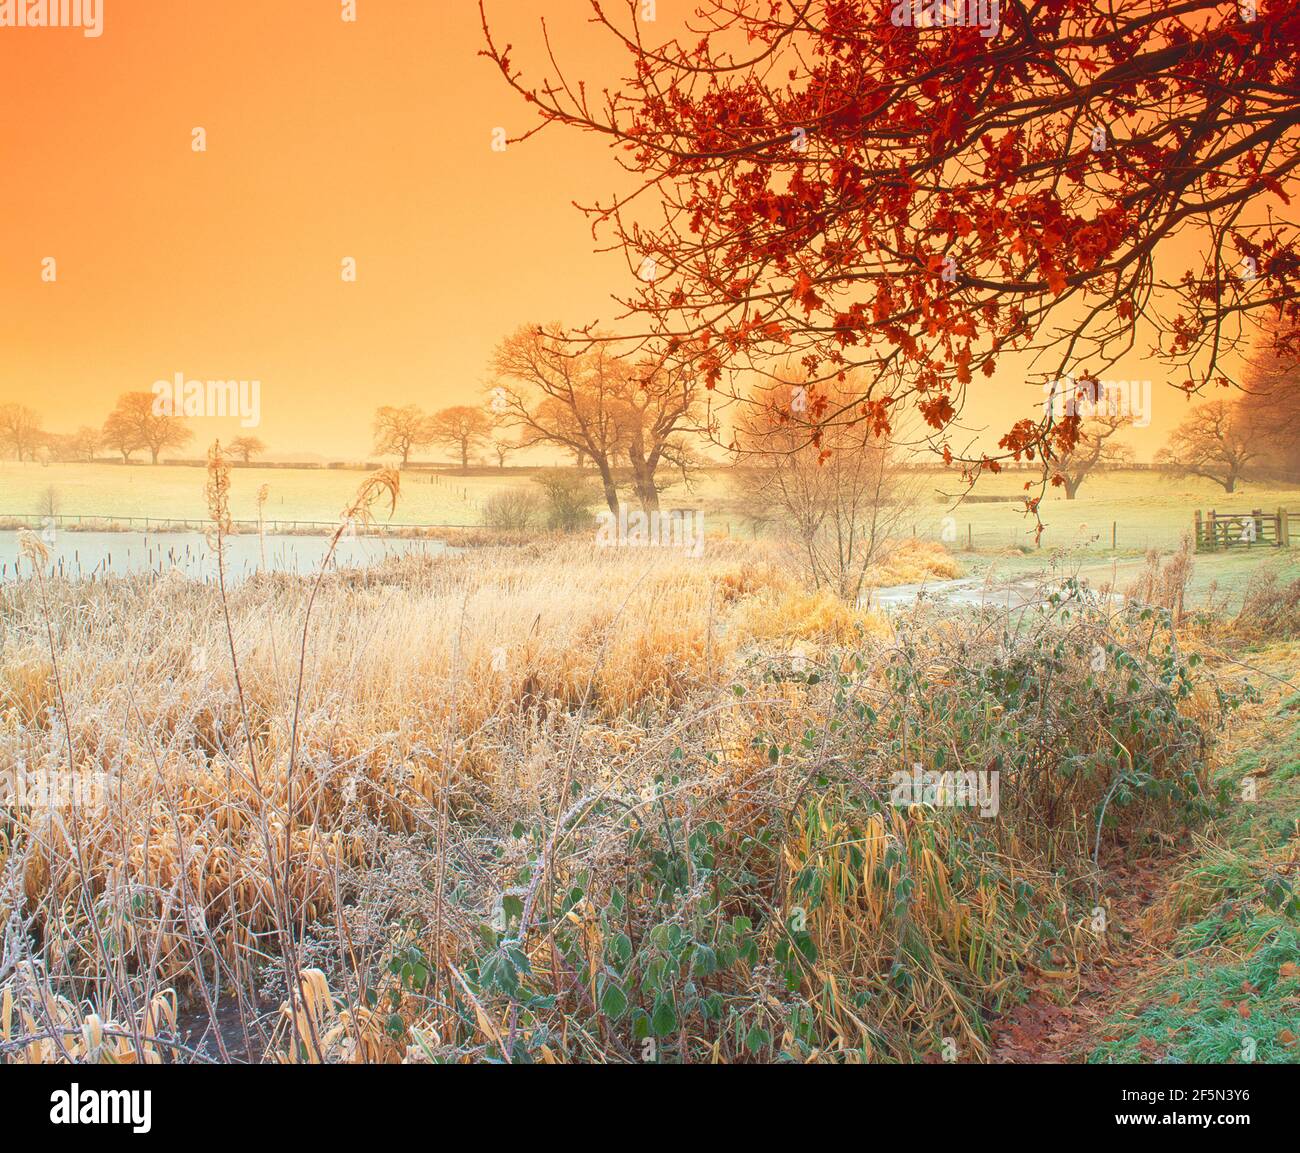 frosted rural scene, Stock Photo